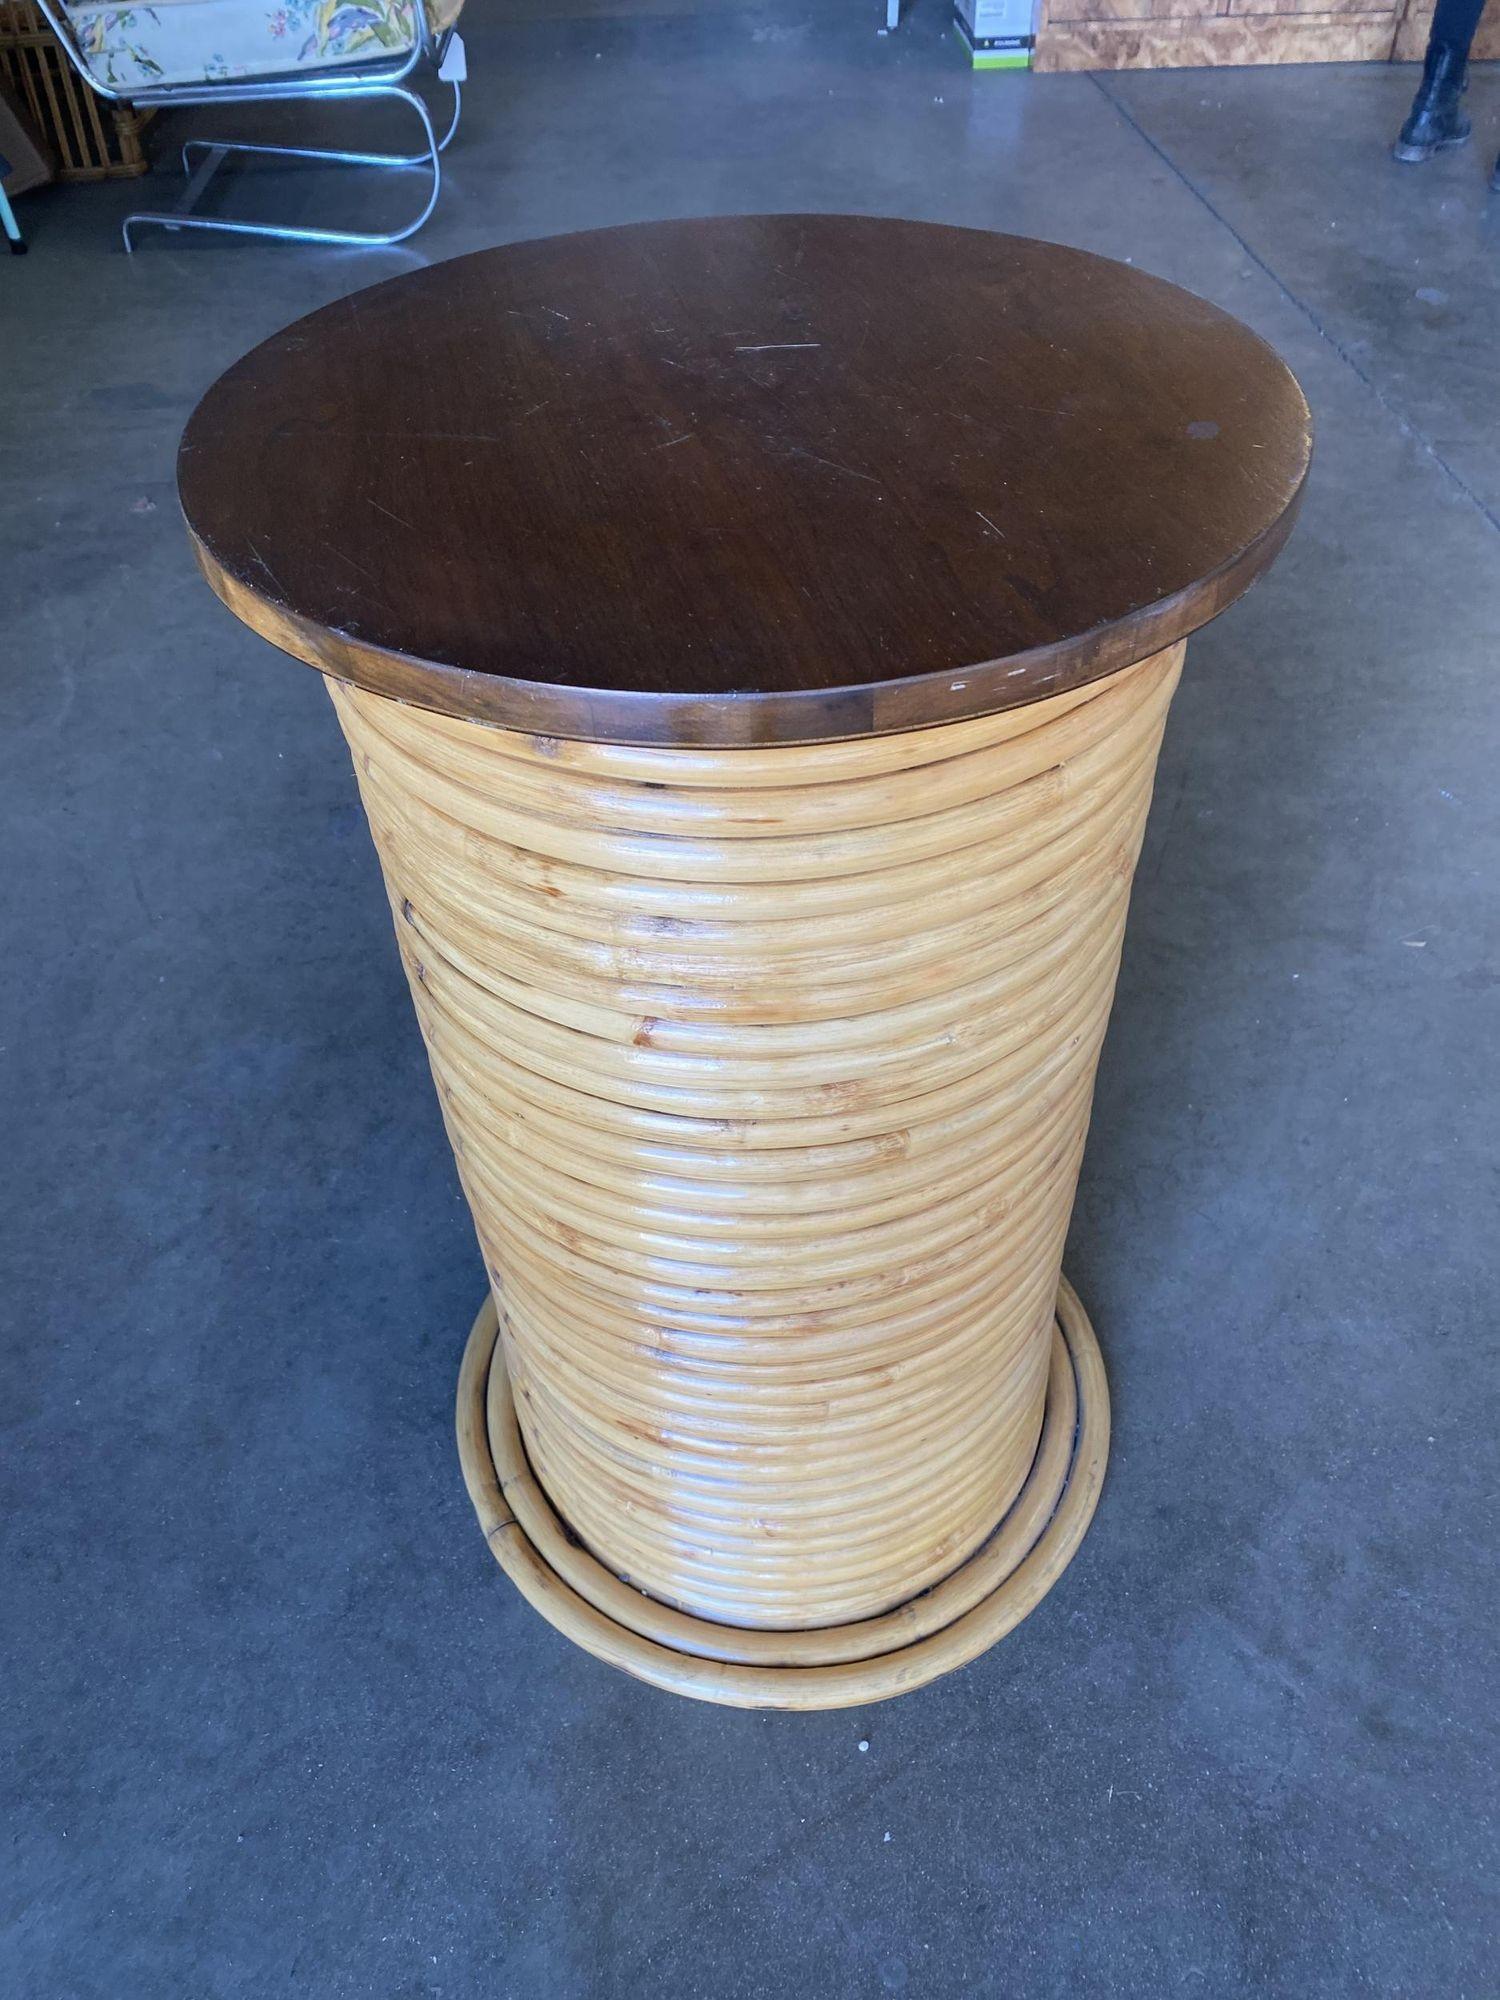 Original Post War stacked steam-bent rattan circular pedestal end table with a mahogany top. Perfect for display that key collector's piece.

1950, United States

We only purchase and sell only the best and finest rattan furniture made by the